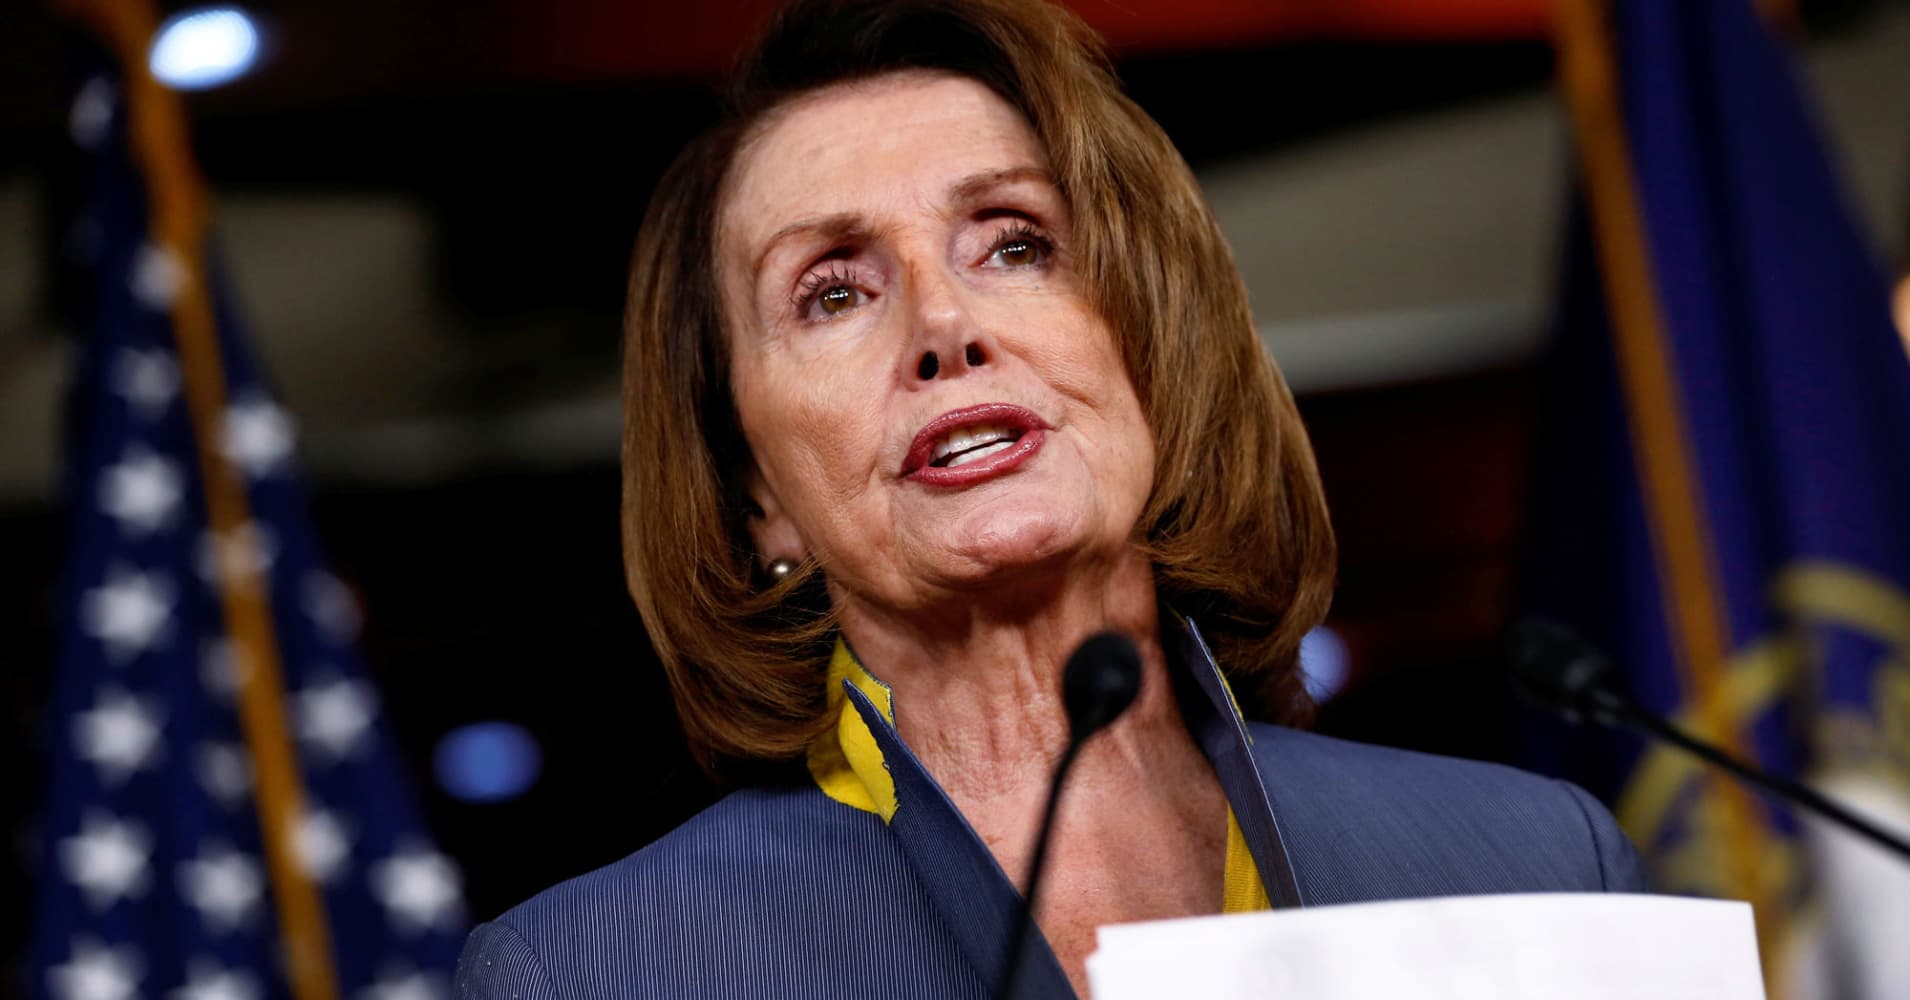 Watch: House Democratic leader Pelosi holds weekly news conference